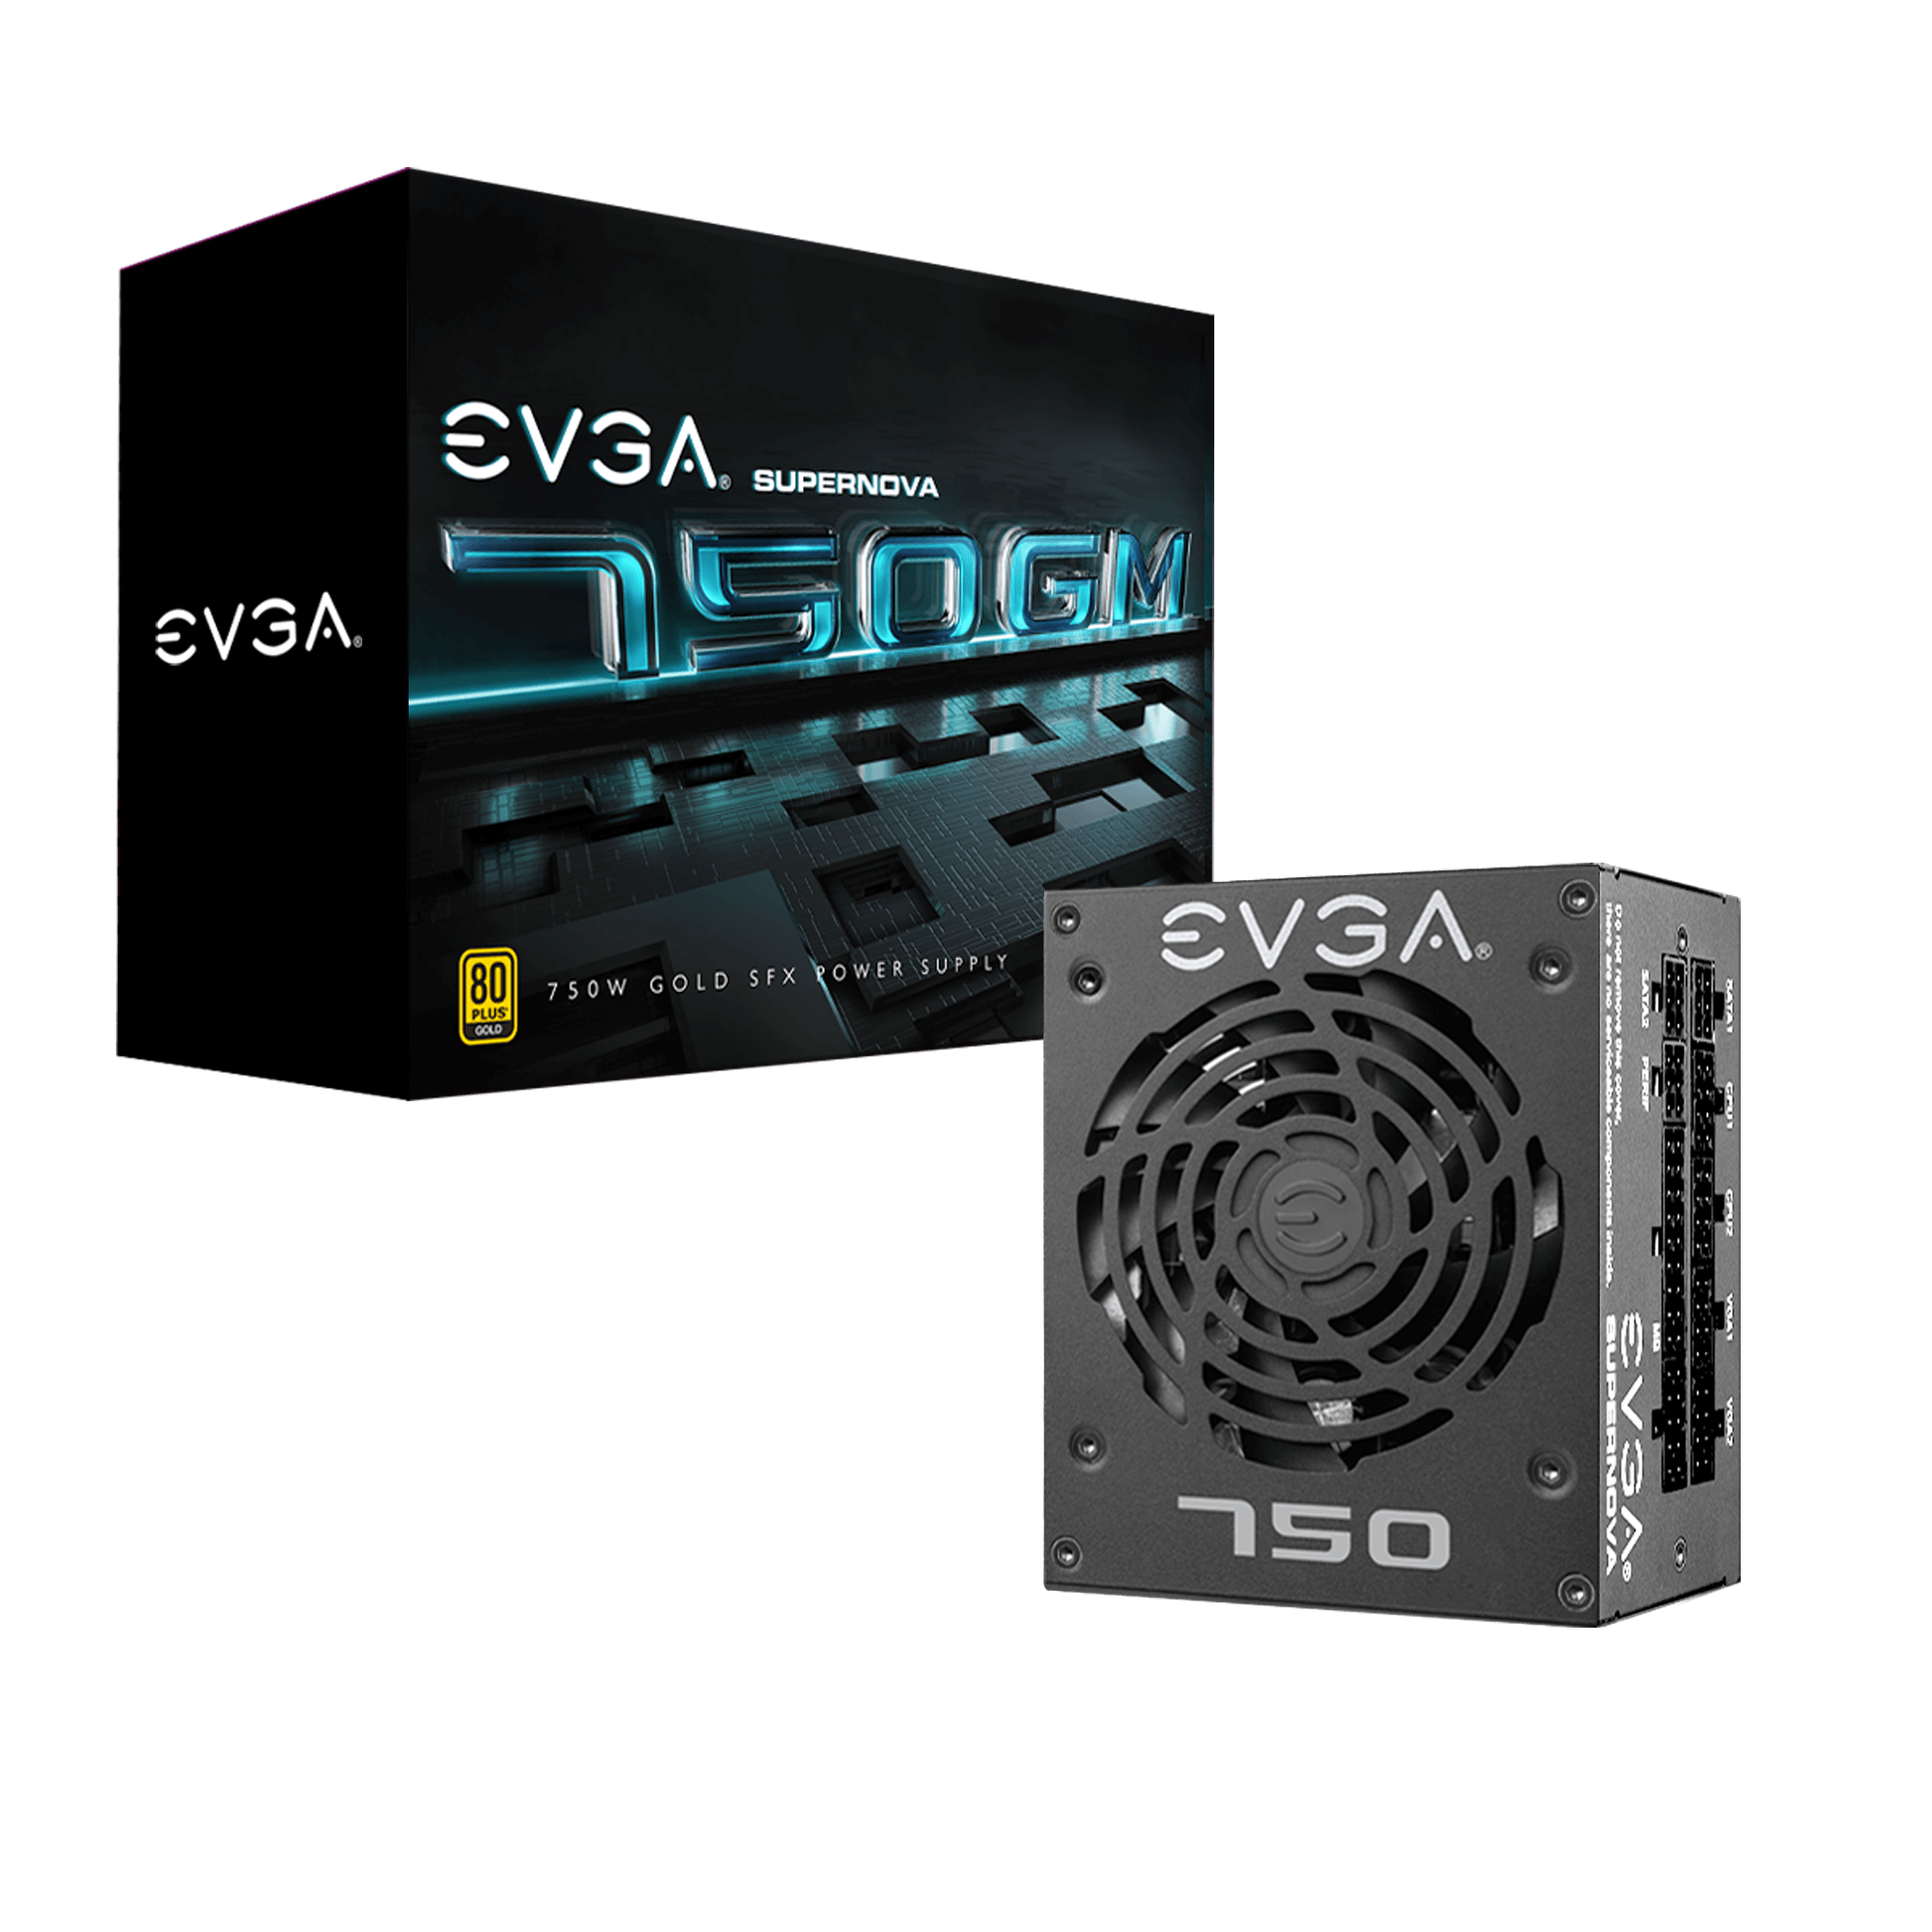 EVGA 750w Gold SFX power supply for $89.99 with free powerlink.